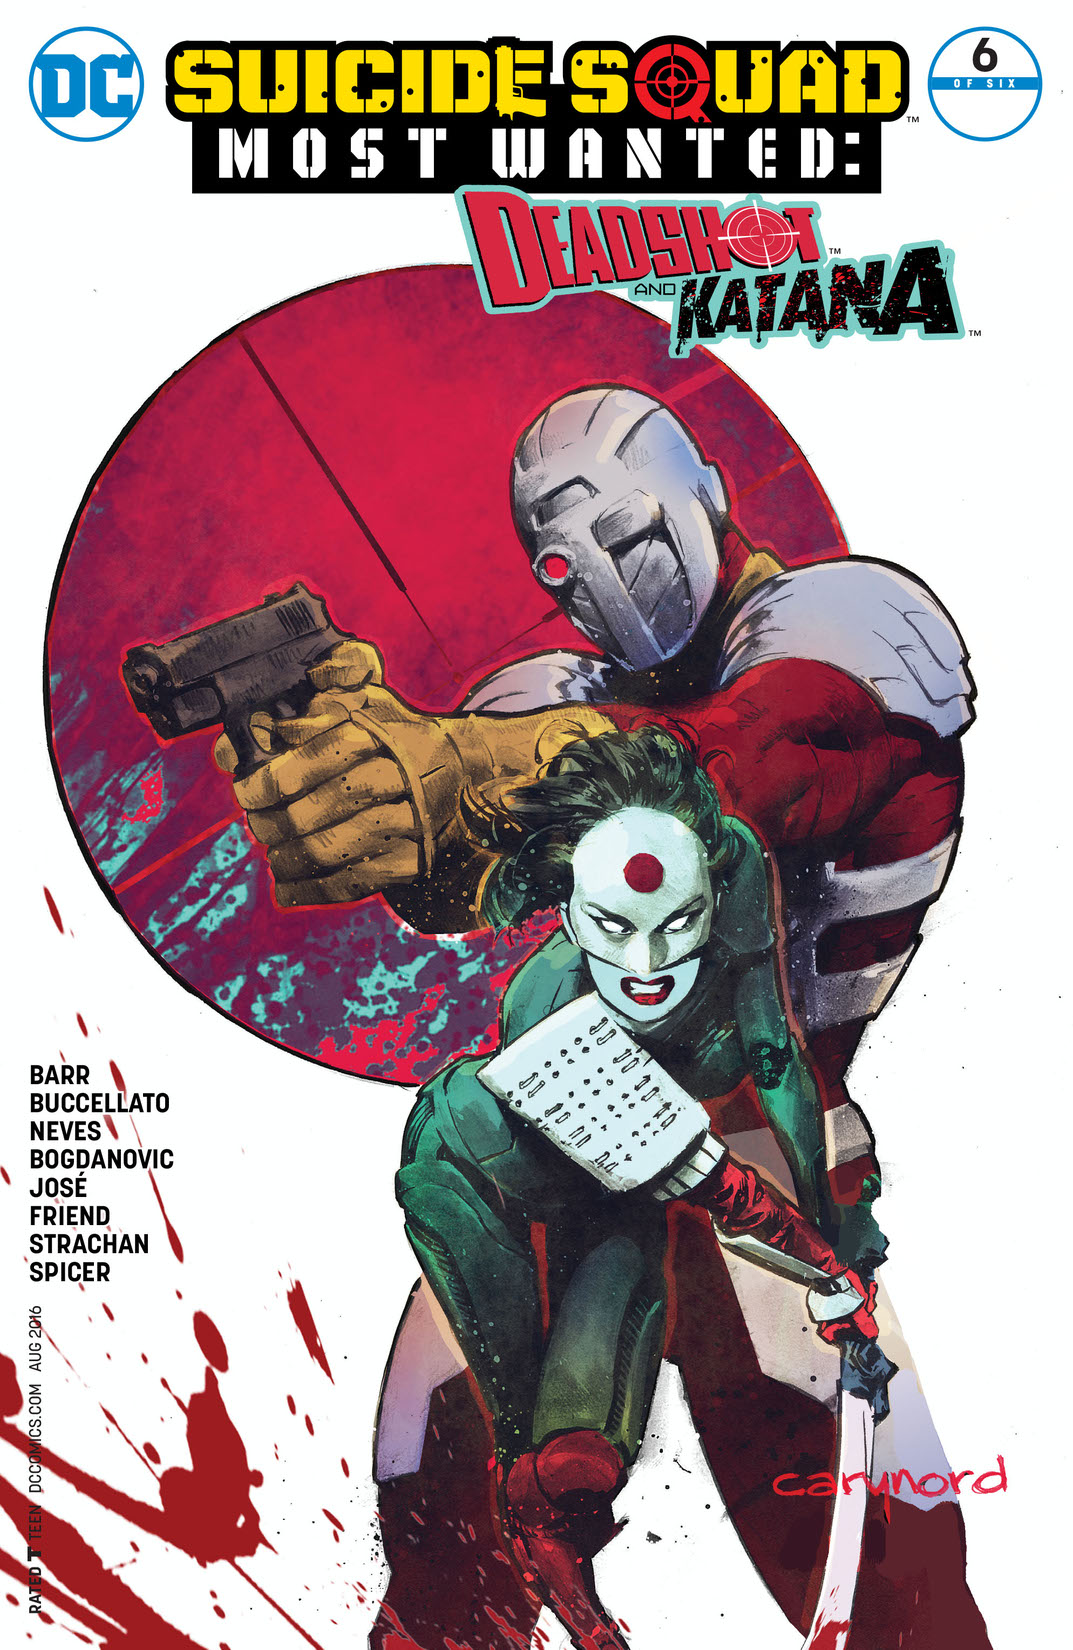 Suicide Squad Most Wanted: Deadshot and Katana #6 preview images